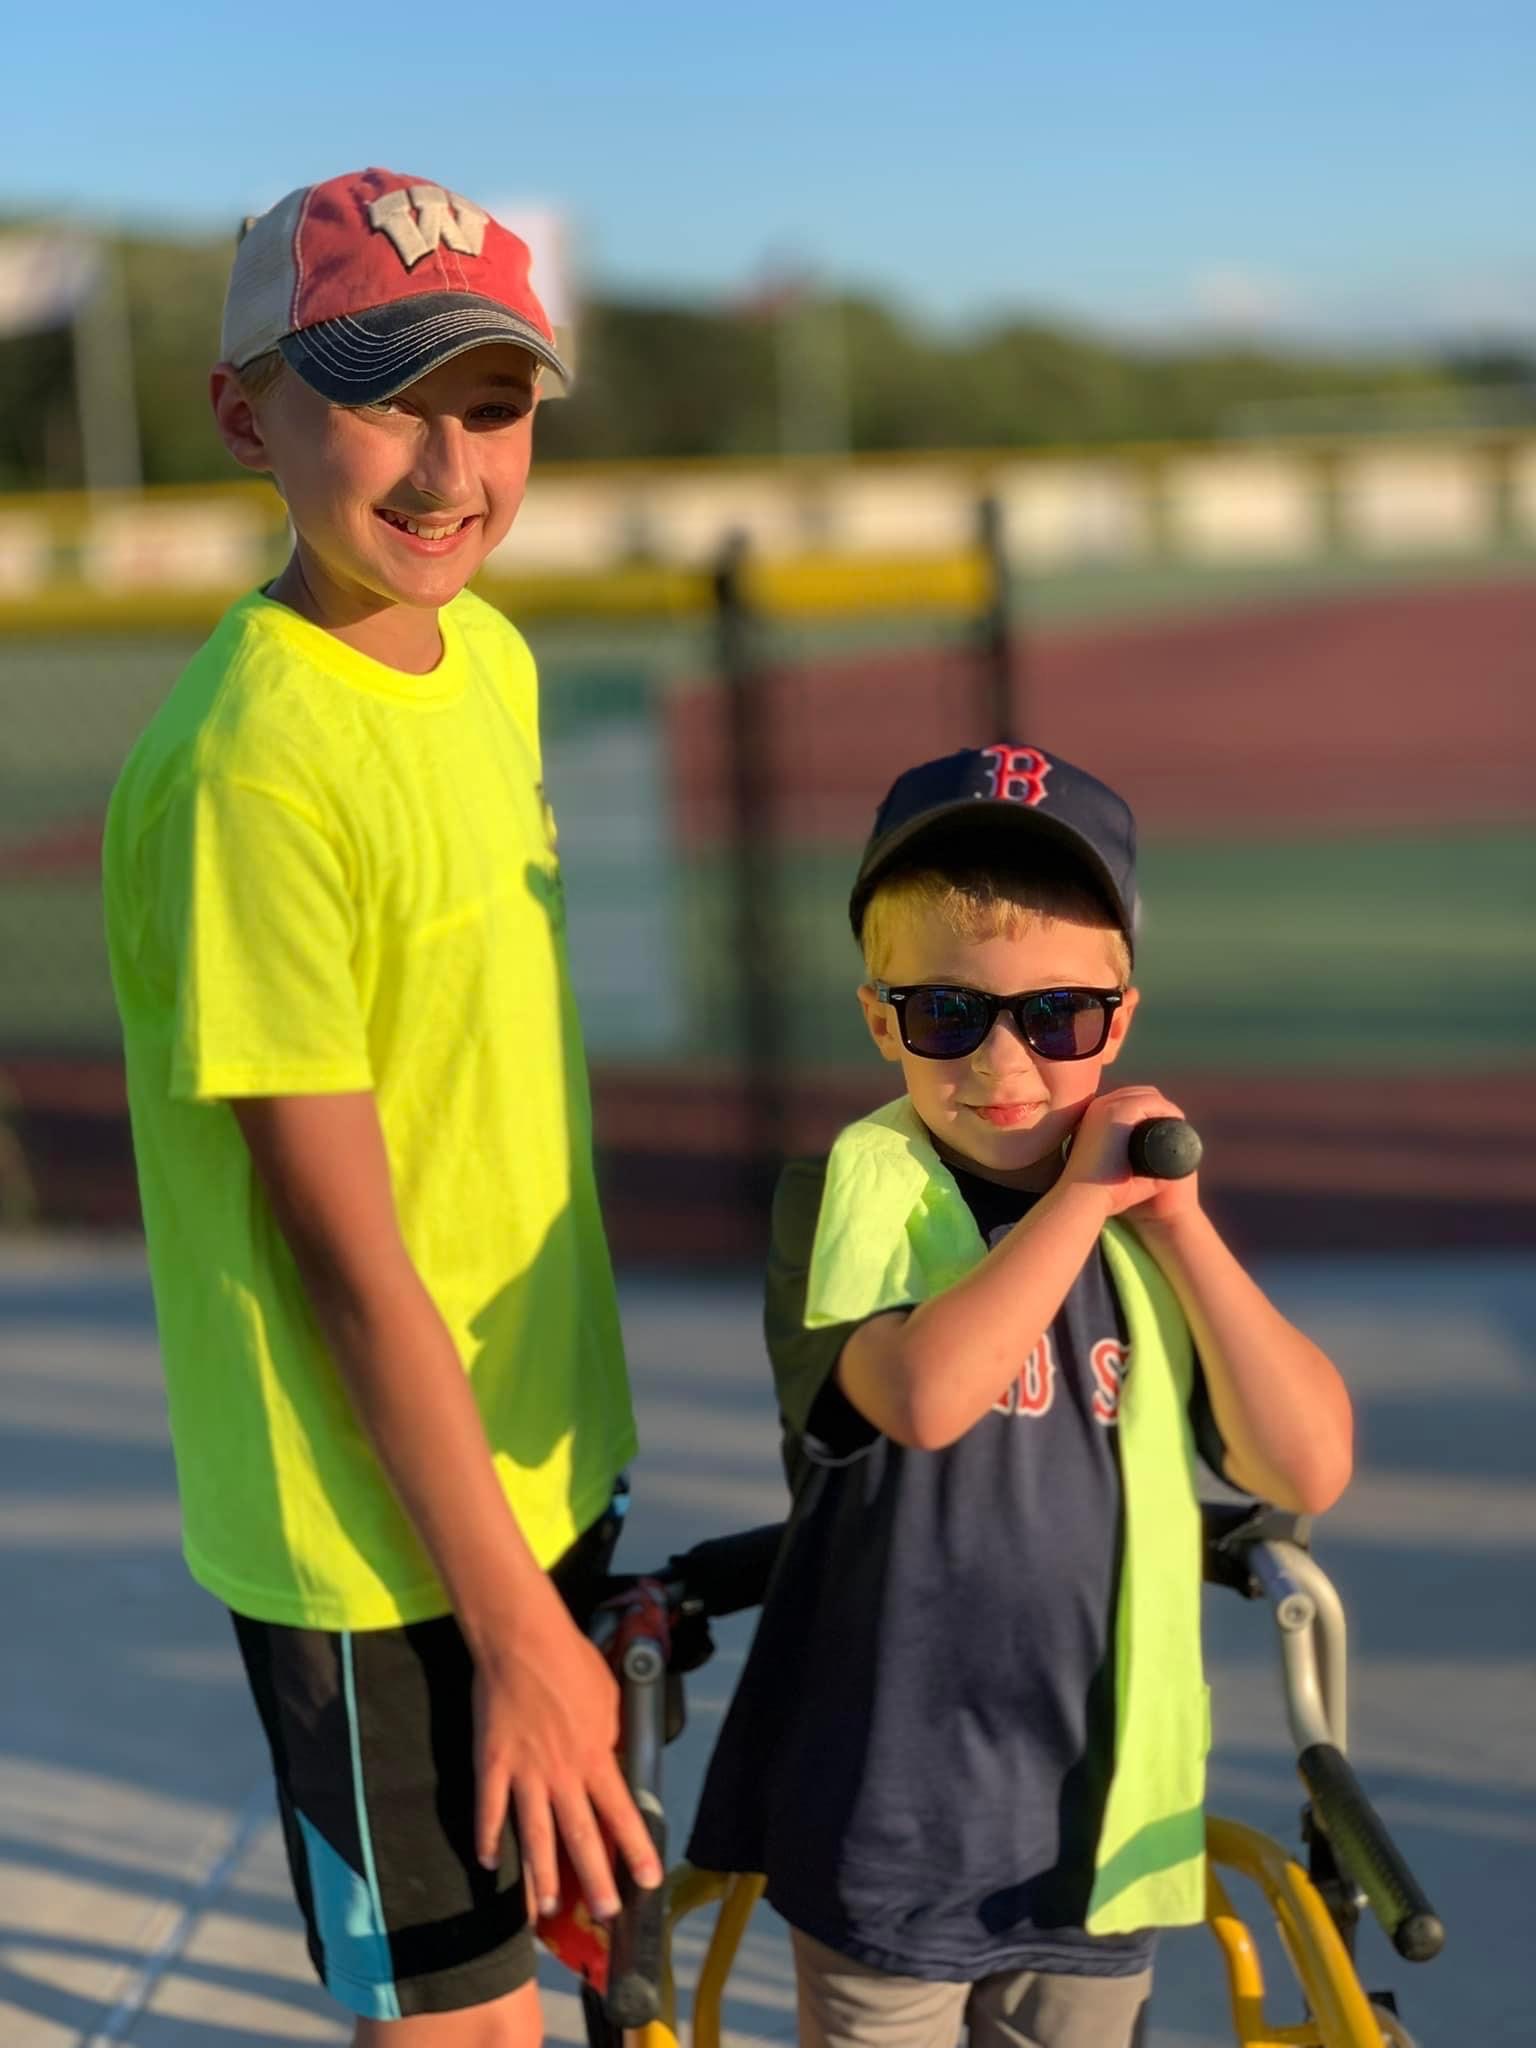 Batter and buddy for Miracle League baseball 